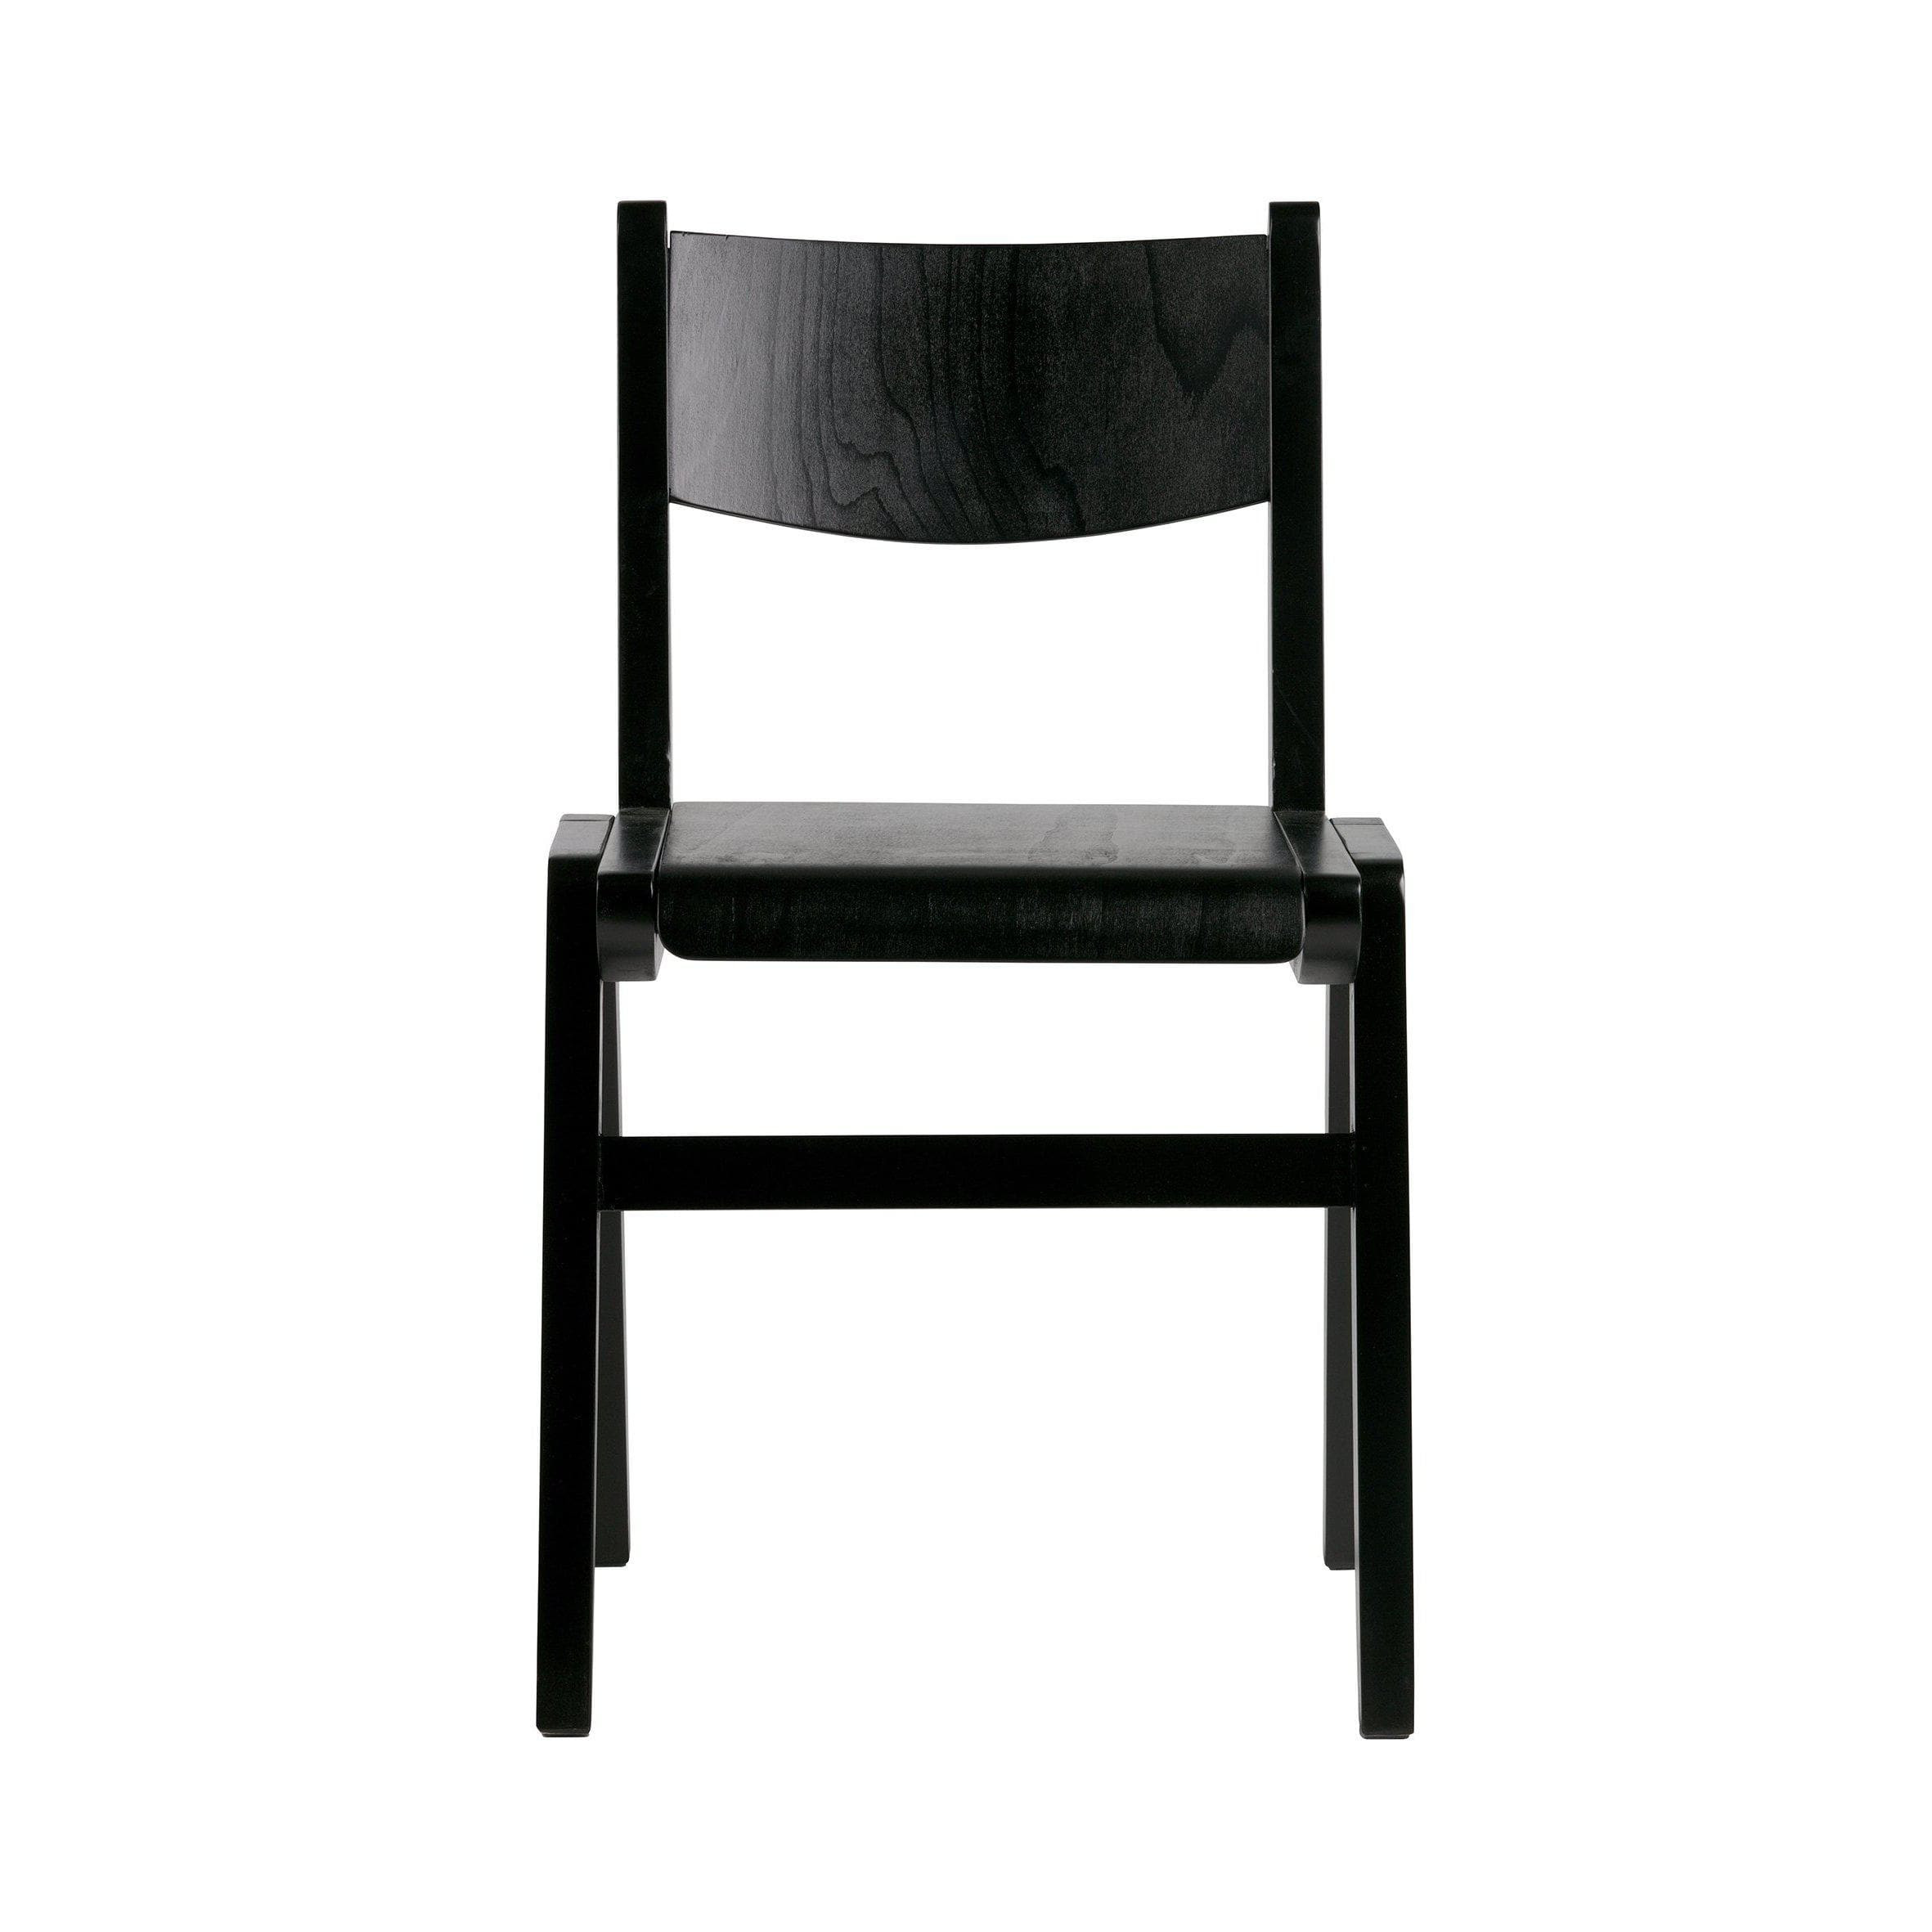 Rent a Dining chair Academy black? Rent at KeyPro furniture rental!